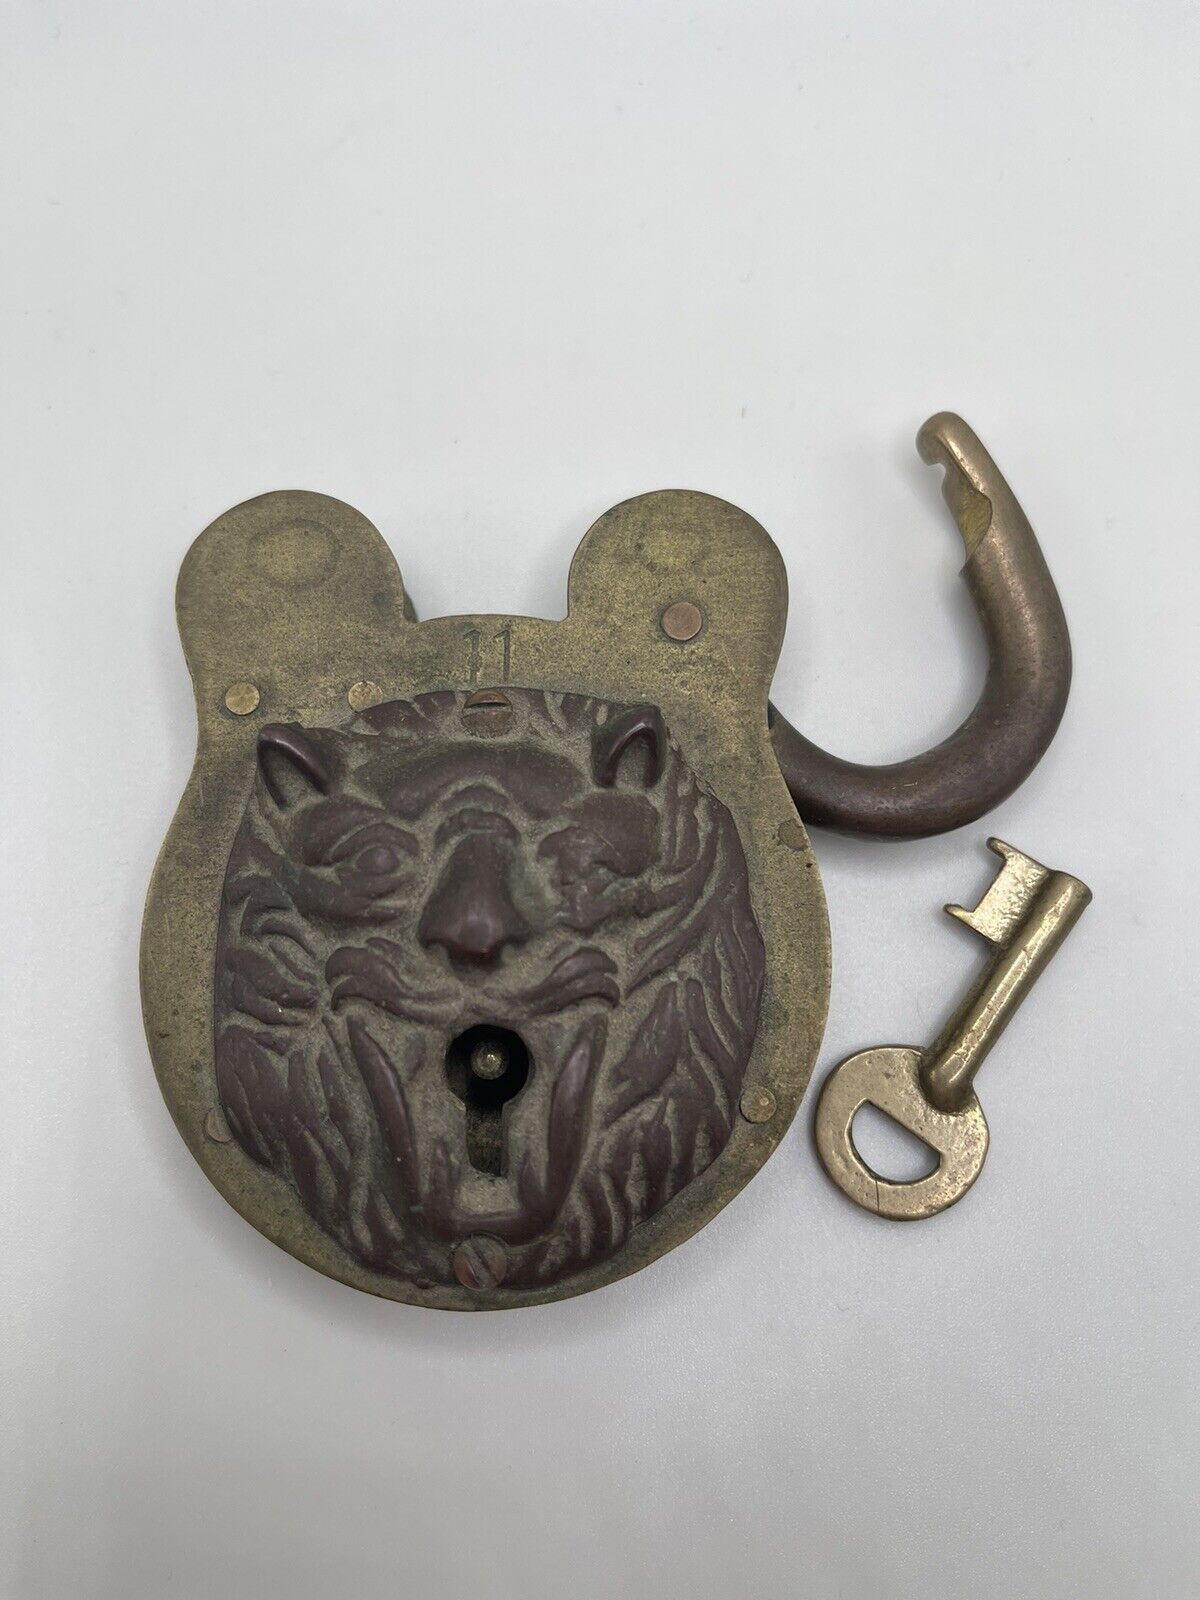 Antique Rare 1896 Brass Lion Face Lock with Key #11 Patented FEBY 18 1896